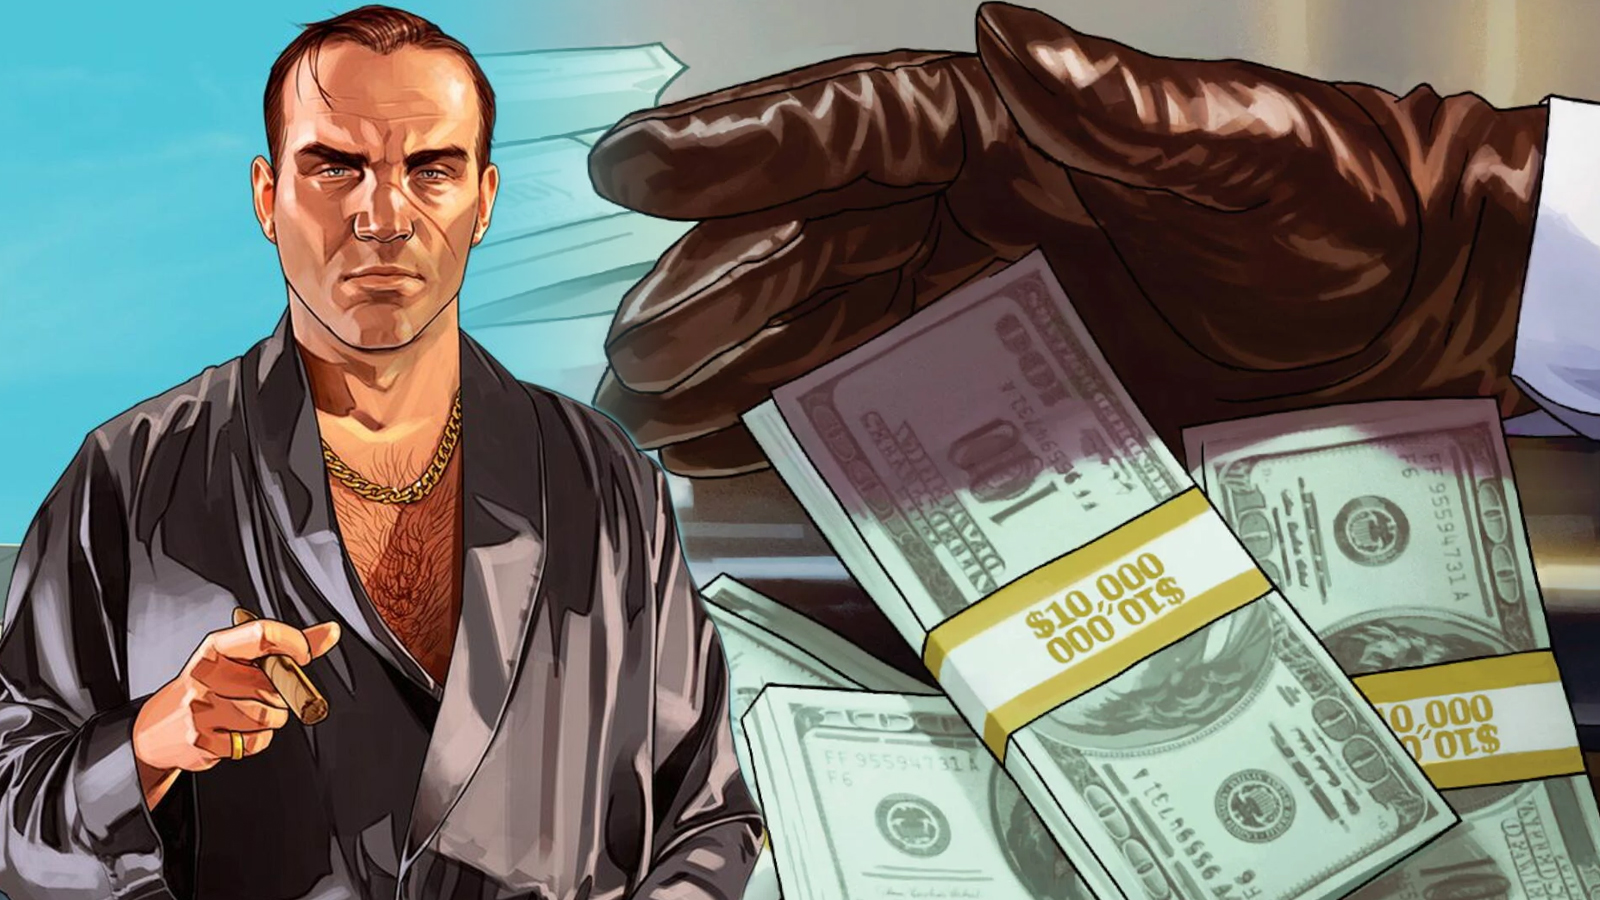 Rockstar Games Updates Policy on RP Servers: Bans Loot Boxes, NFTs, and Monetizing Mods